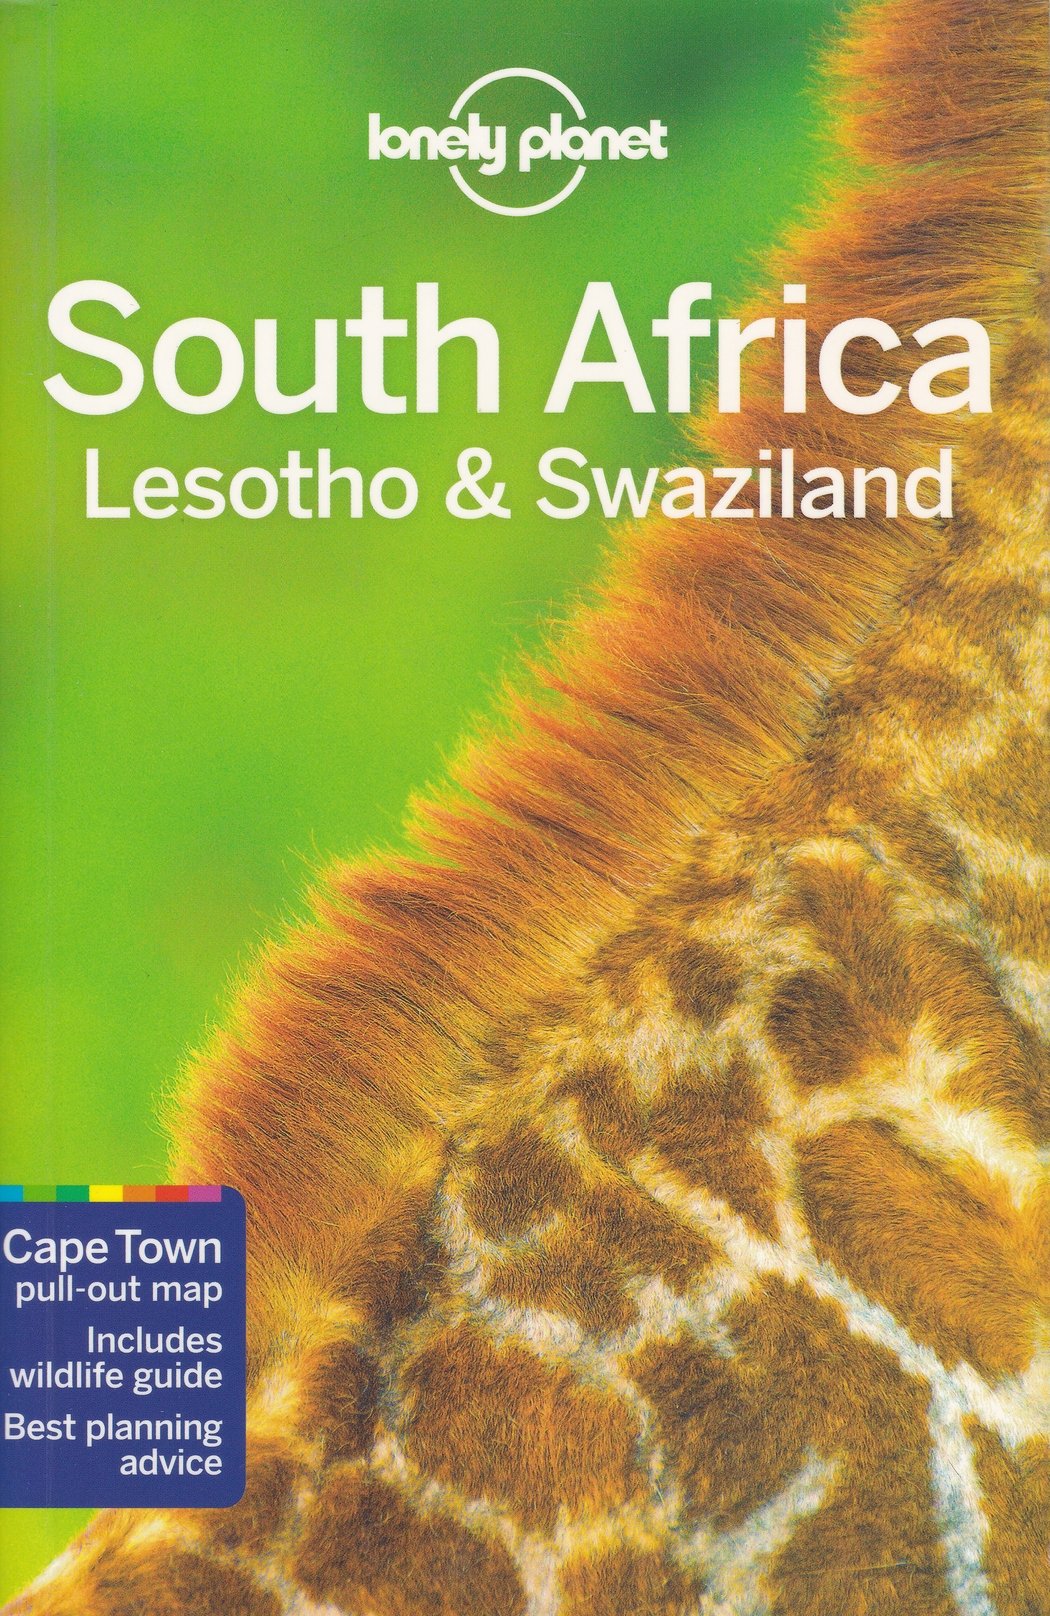 Lonely Planet - South Africa, Lesotho & Swaziland (Rippl-Rónai Múzeum CC BY-NC-ND)